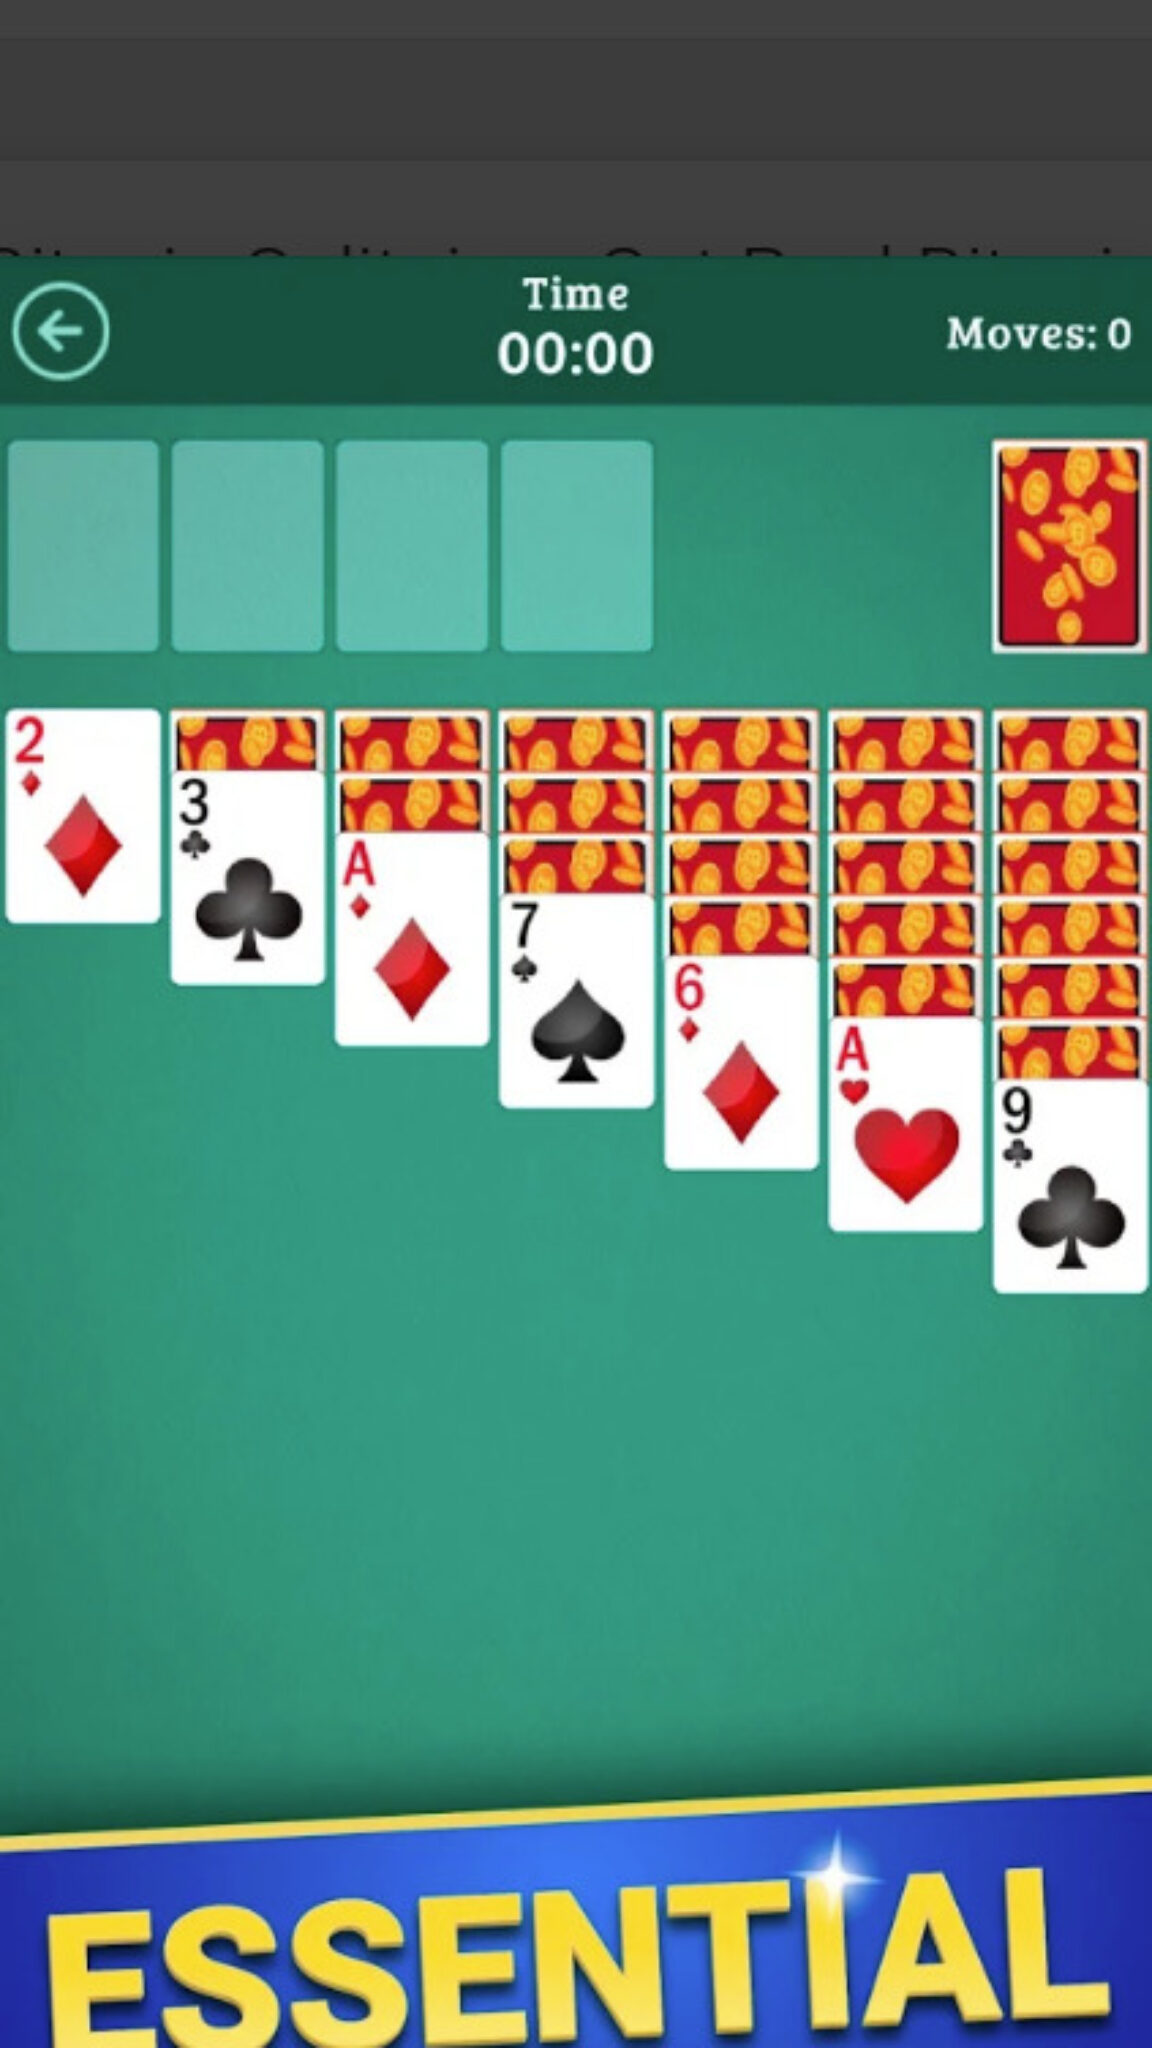 Bitcoin Solitaire by Bling - I Want Free Crypto - Get Your ...